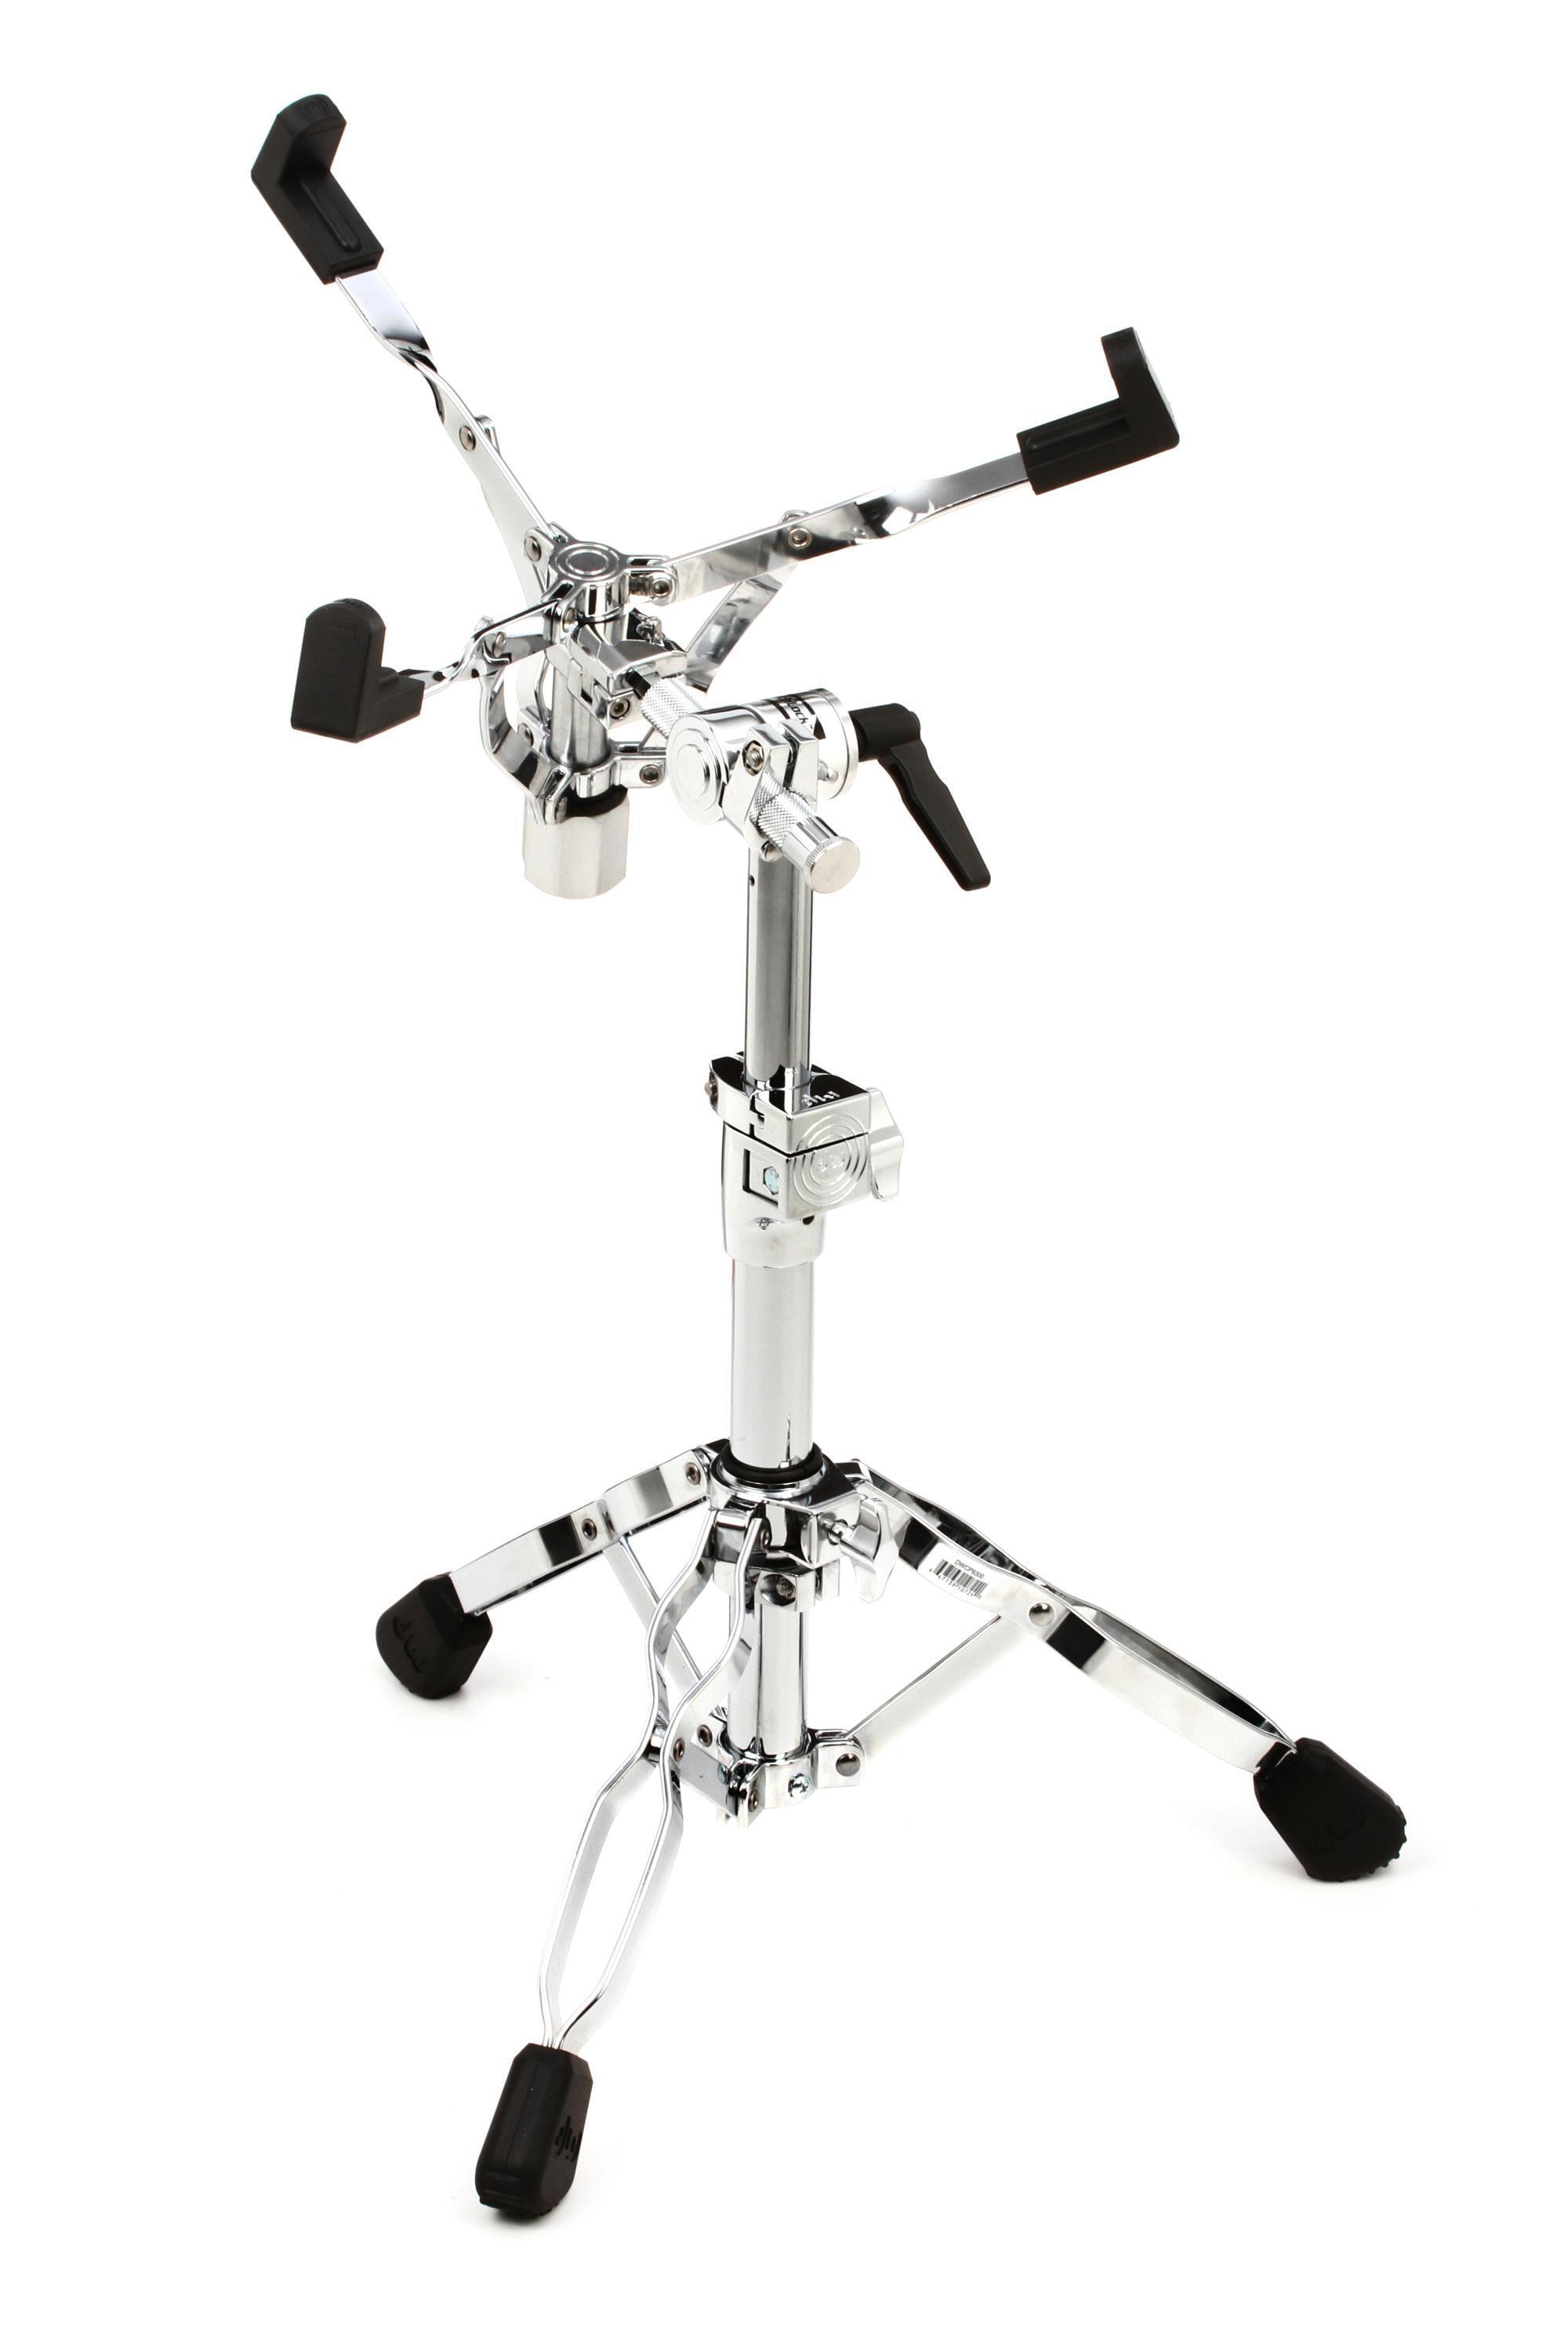 DW DWCP9300 9000 Series Heavy Duty Snare Stand - Large Basket